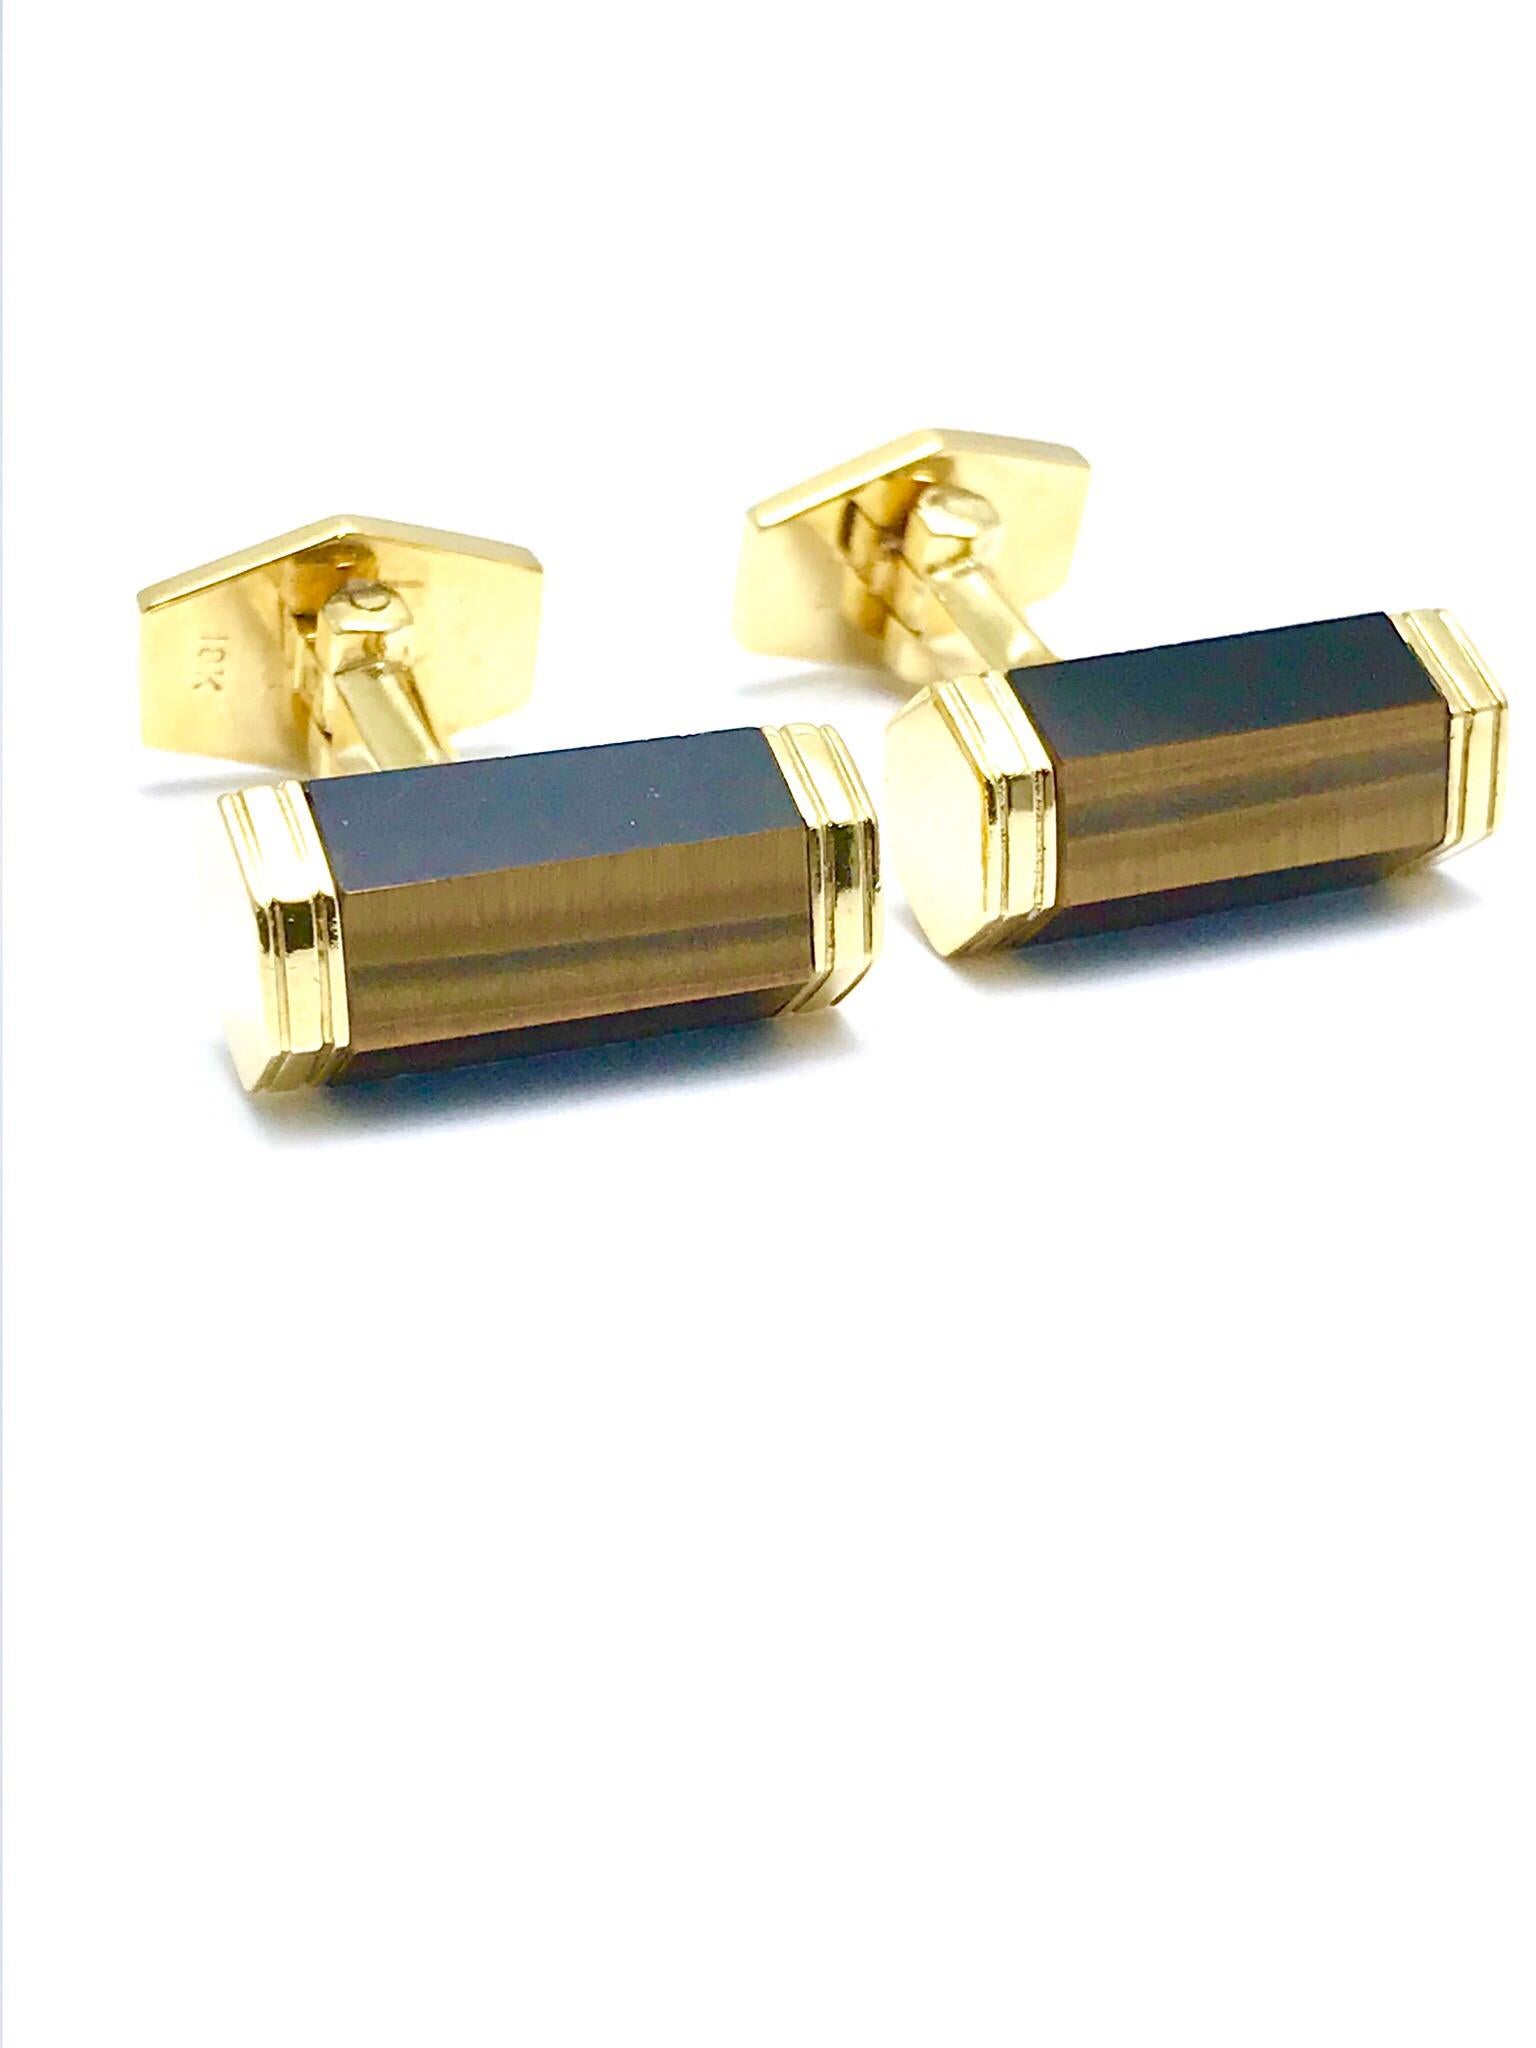 These are a great pair of cufflinks to own!  Made up of Tiger's Eye Quartz and 18 karat yellow gold with an easy to use toggle back made with tigers eye quartz as well.  They are a very versatile pair for anyone.  The cufflinks measure 19.90 mm from